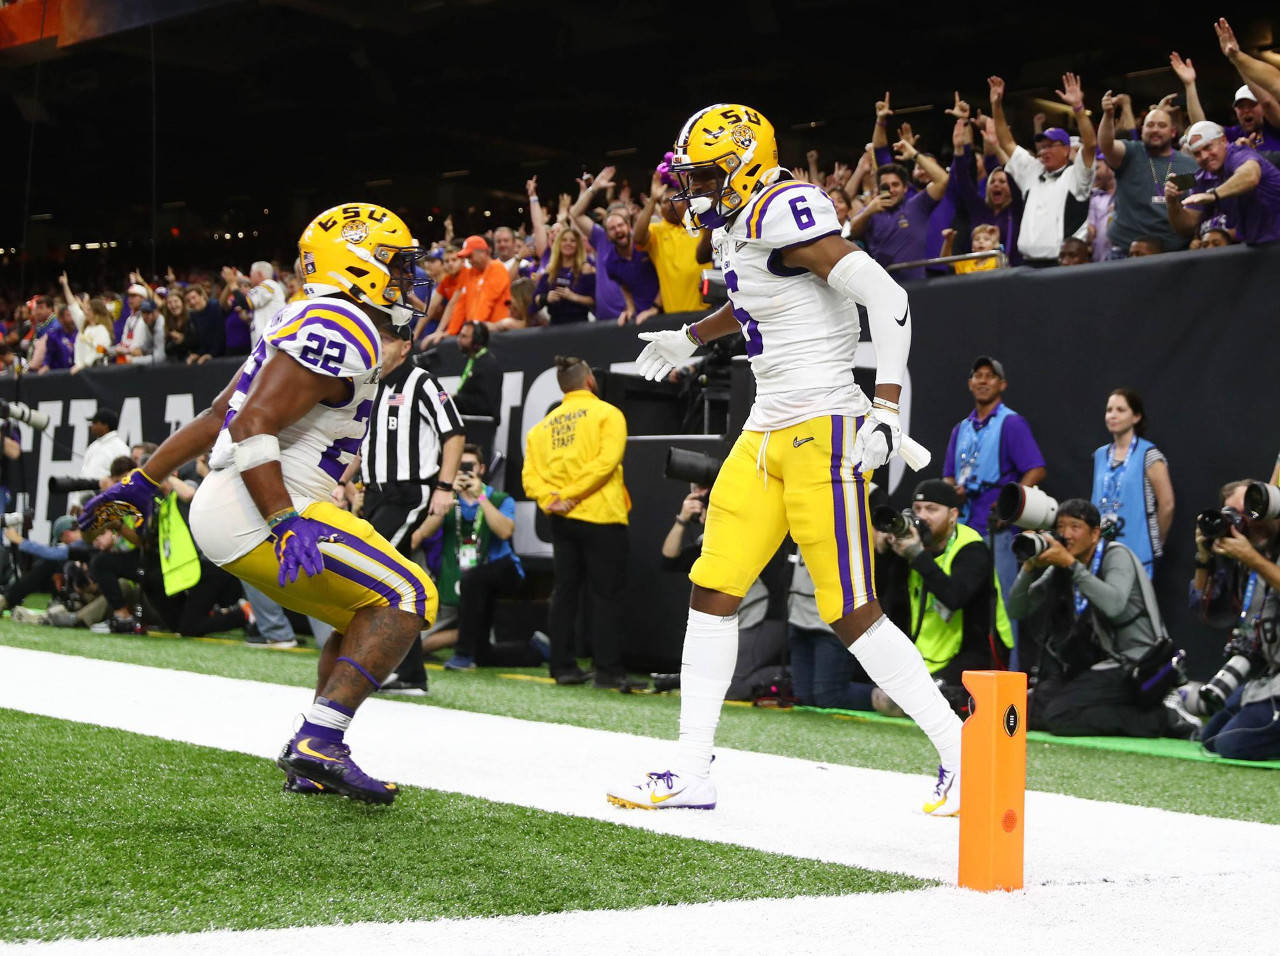 LSU Tigers wide receiver Terrace Marshall Jr. (6) celebrates with running back Clyde Edwards-Helaire (22) after scoring a touchdown against the Clemson Tigers in the fourth quarter in the College Football Playoff national championship game at Mercedes-Benz Superdome. (Mark J. Rebilas | USA Today Sports)